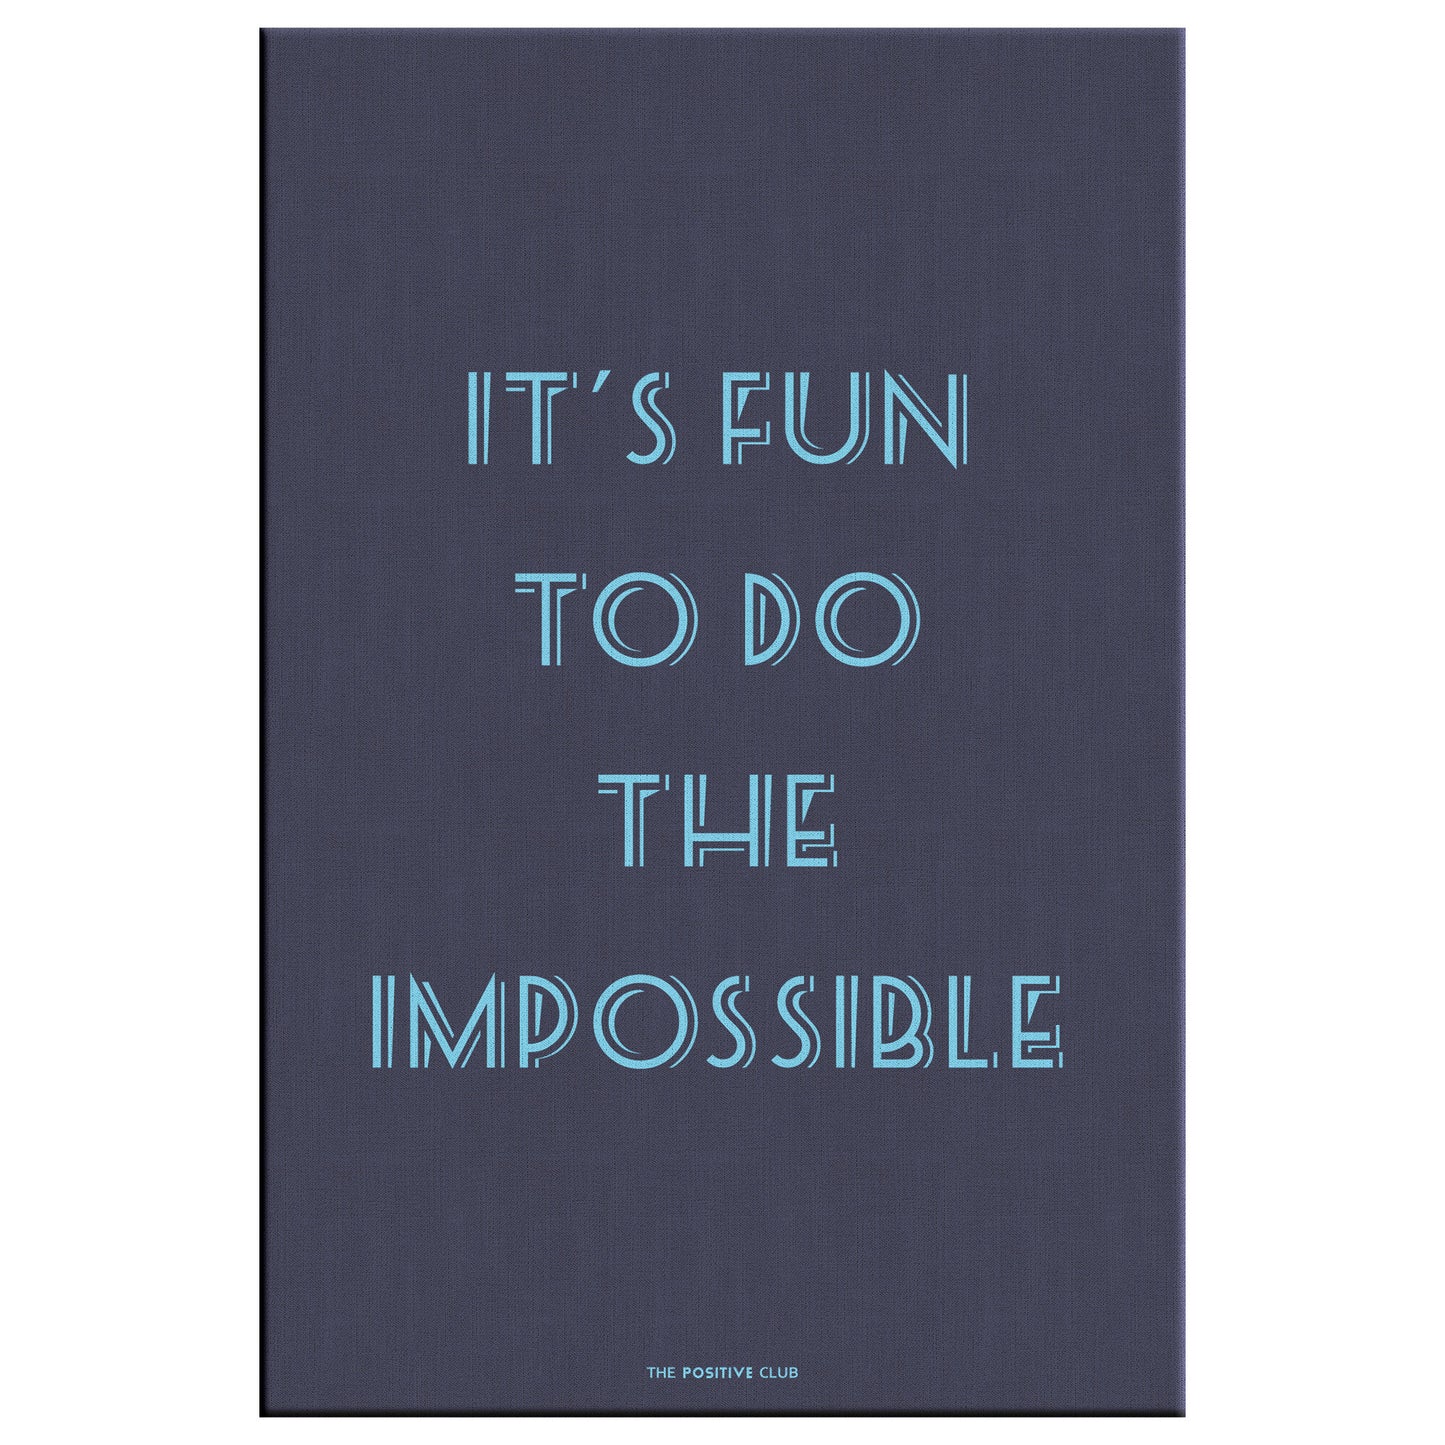 IT’S FUN TO DO THE IMPOSSIBLE